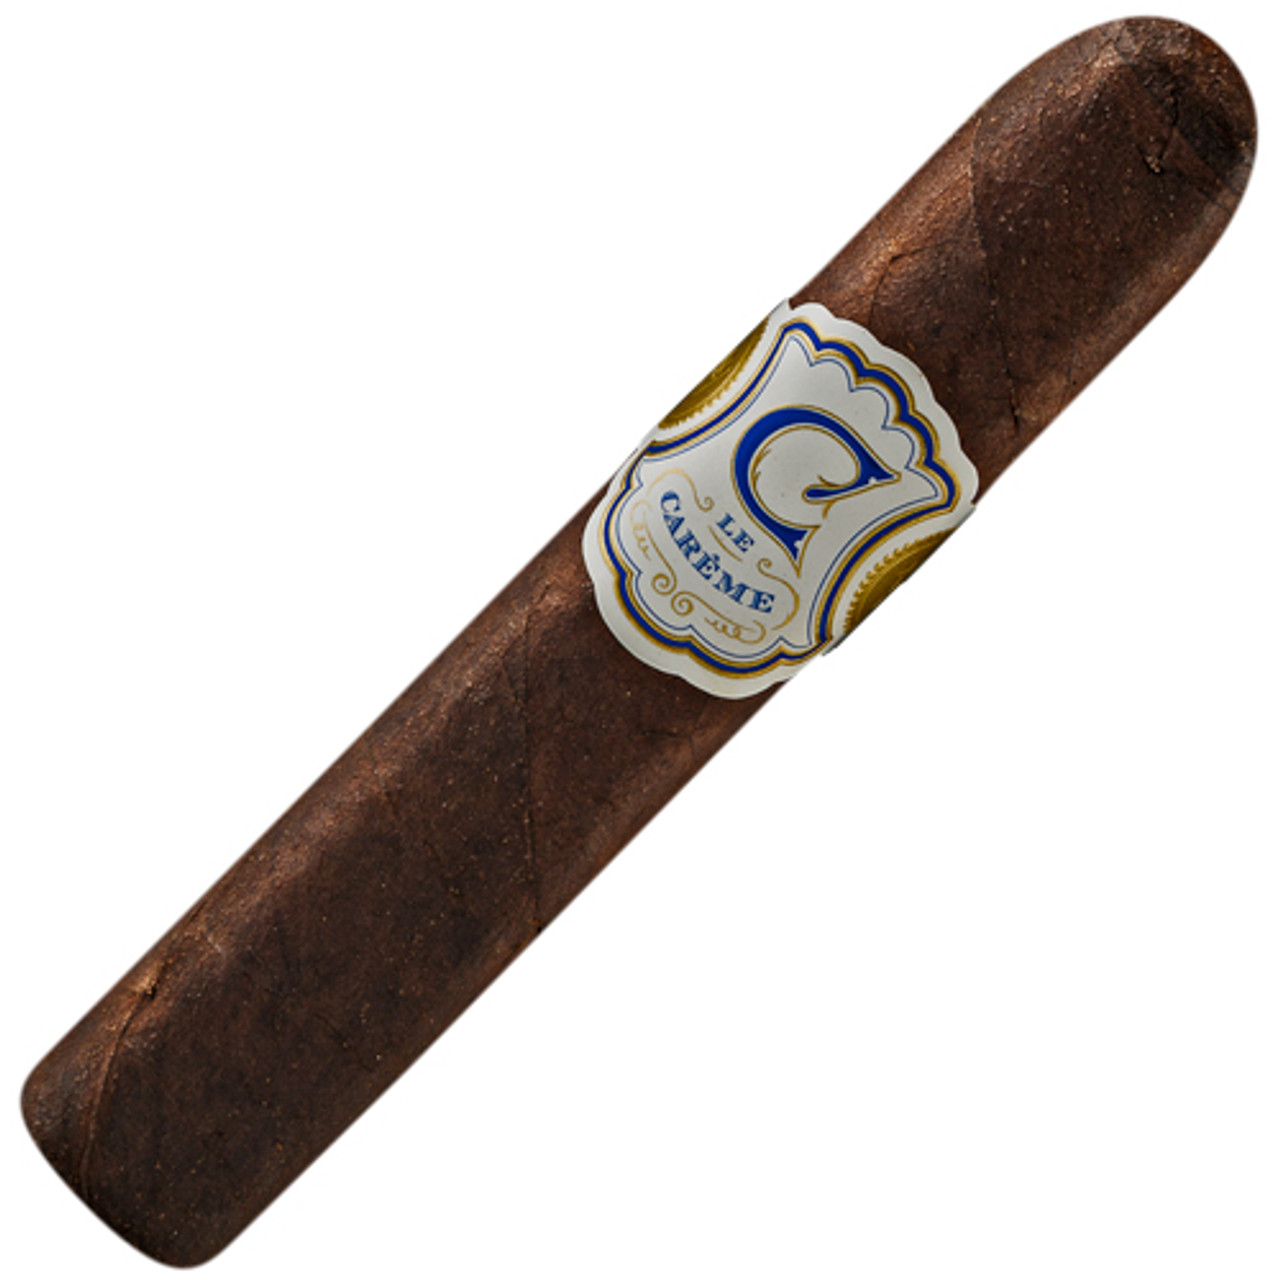 Le Careme by Crowned Heads Robusto Cigars - 5 x 50 (Box of 24)